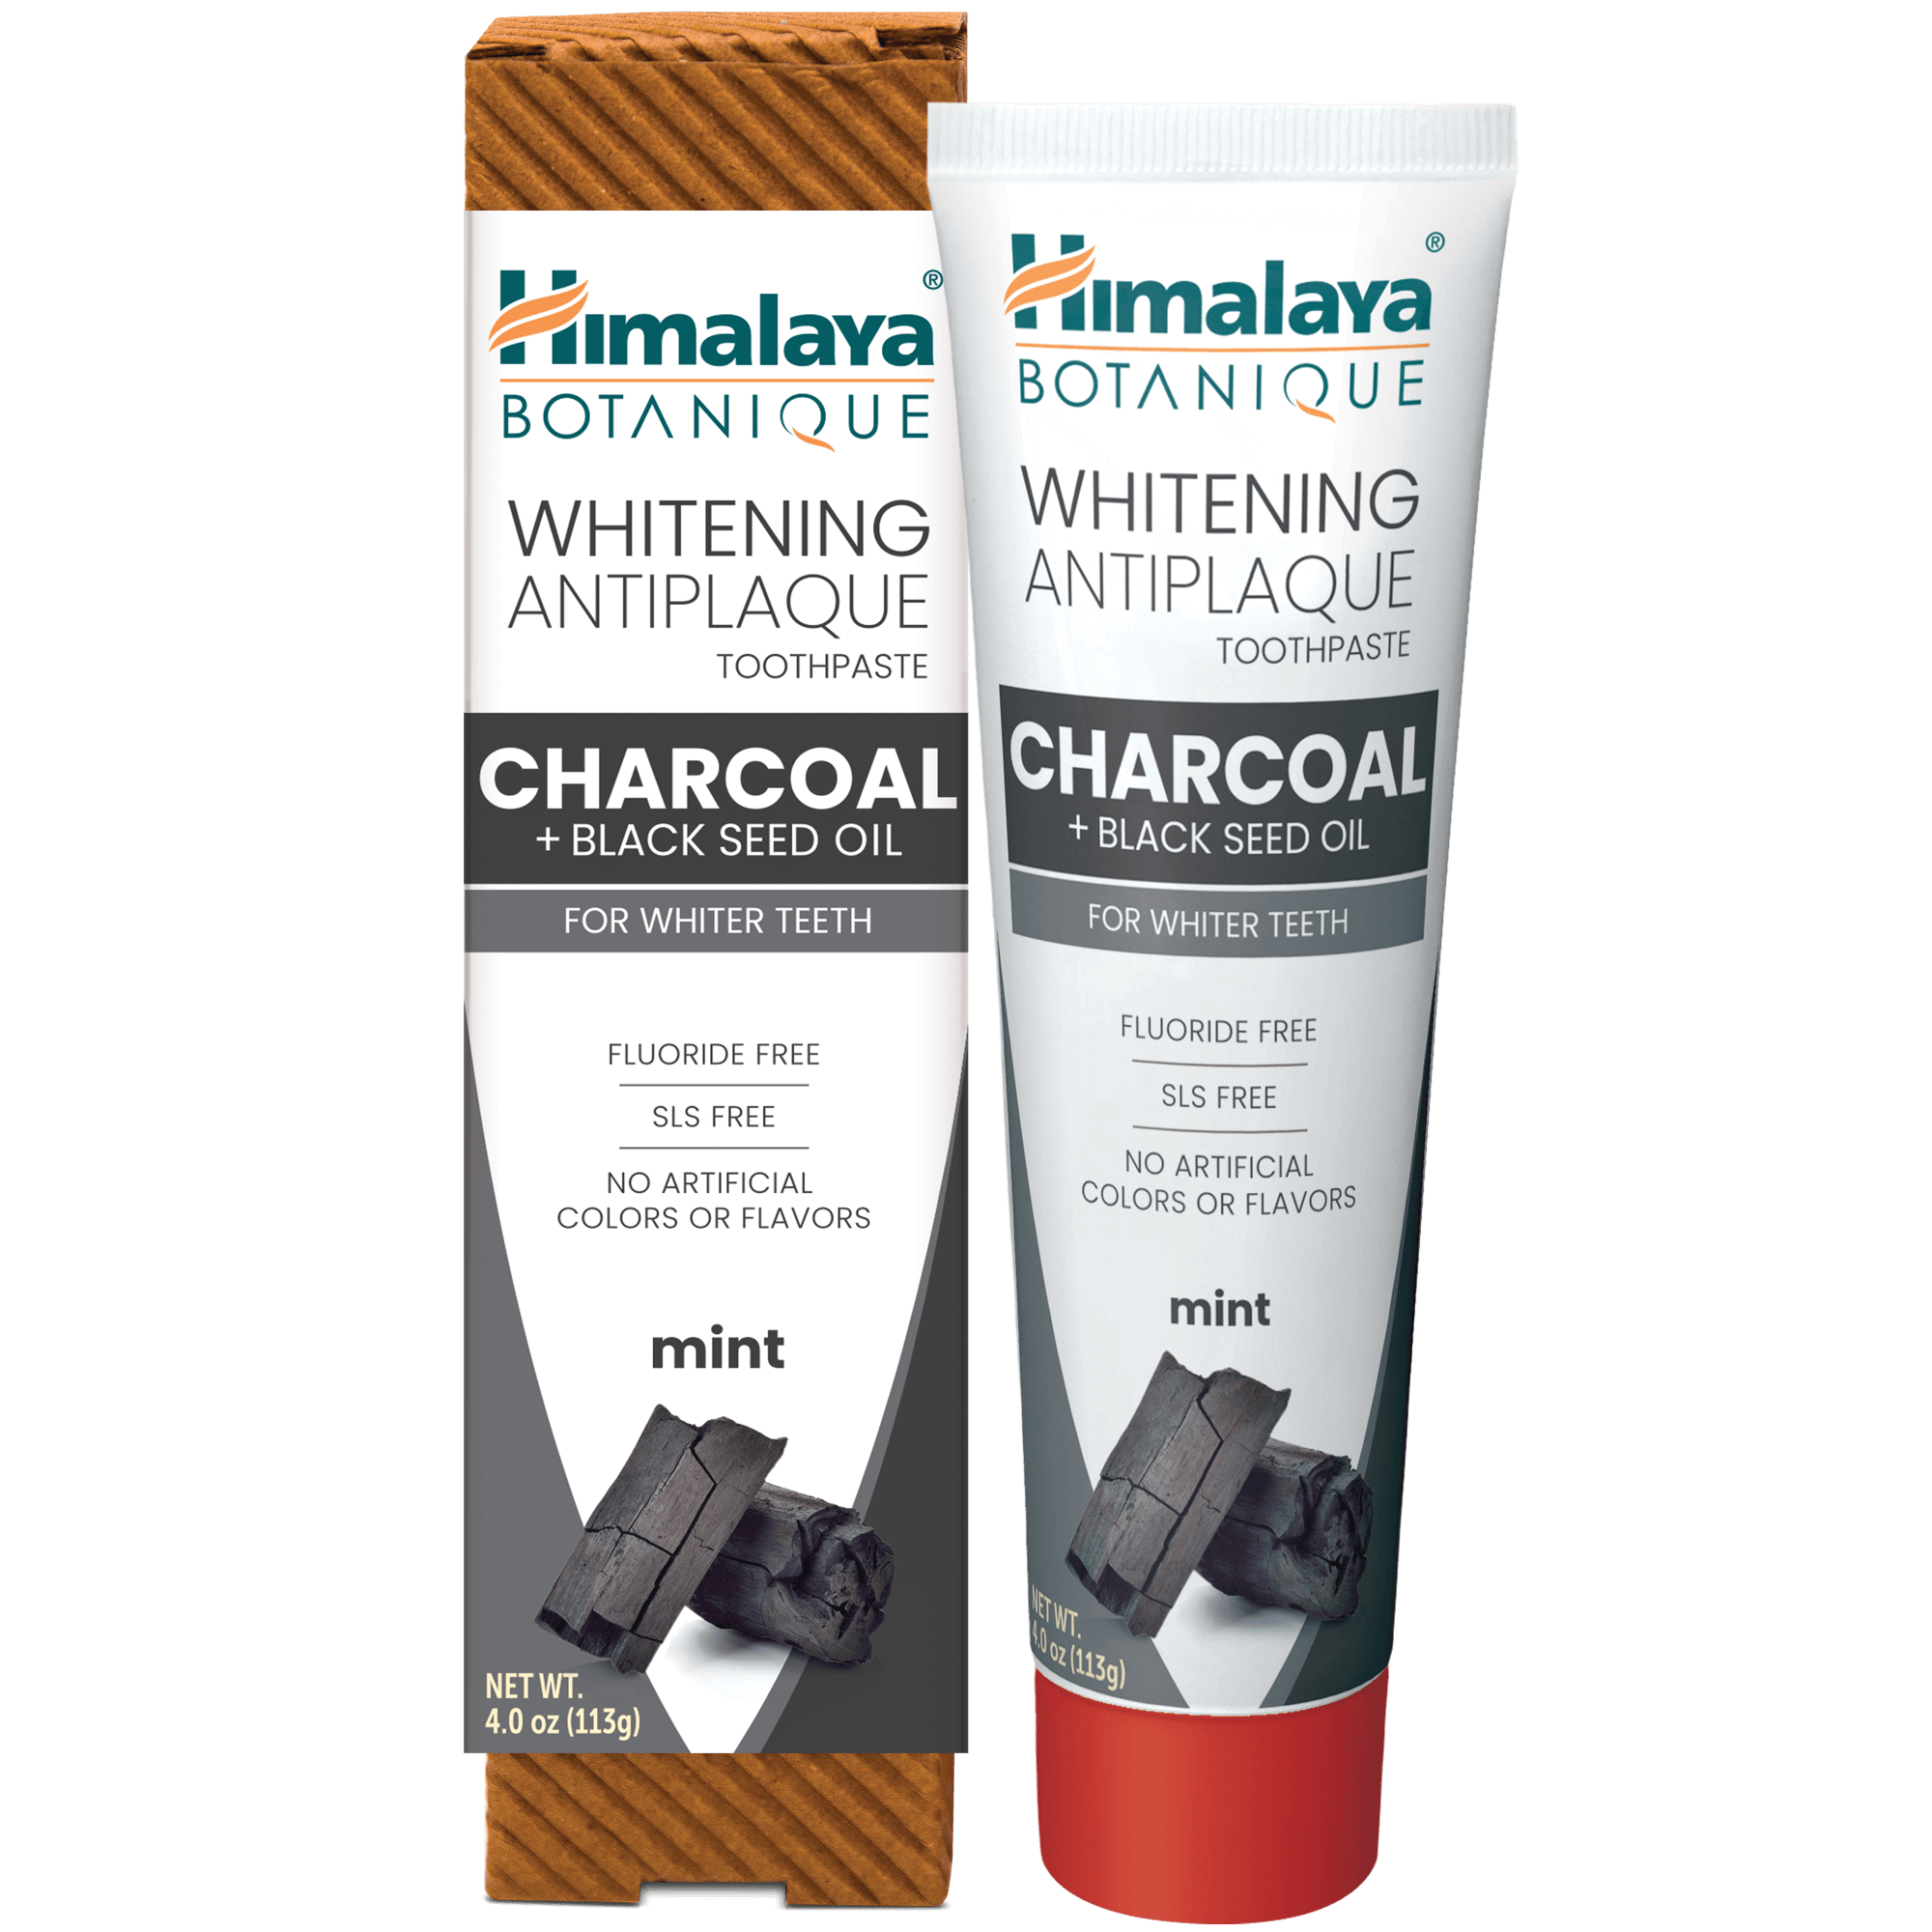 Himalaya Botanique Whitening Antiplaque Toothpaste Charcoal + Black Seed Oil 113G